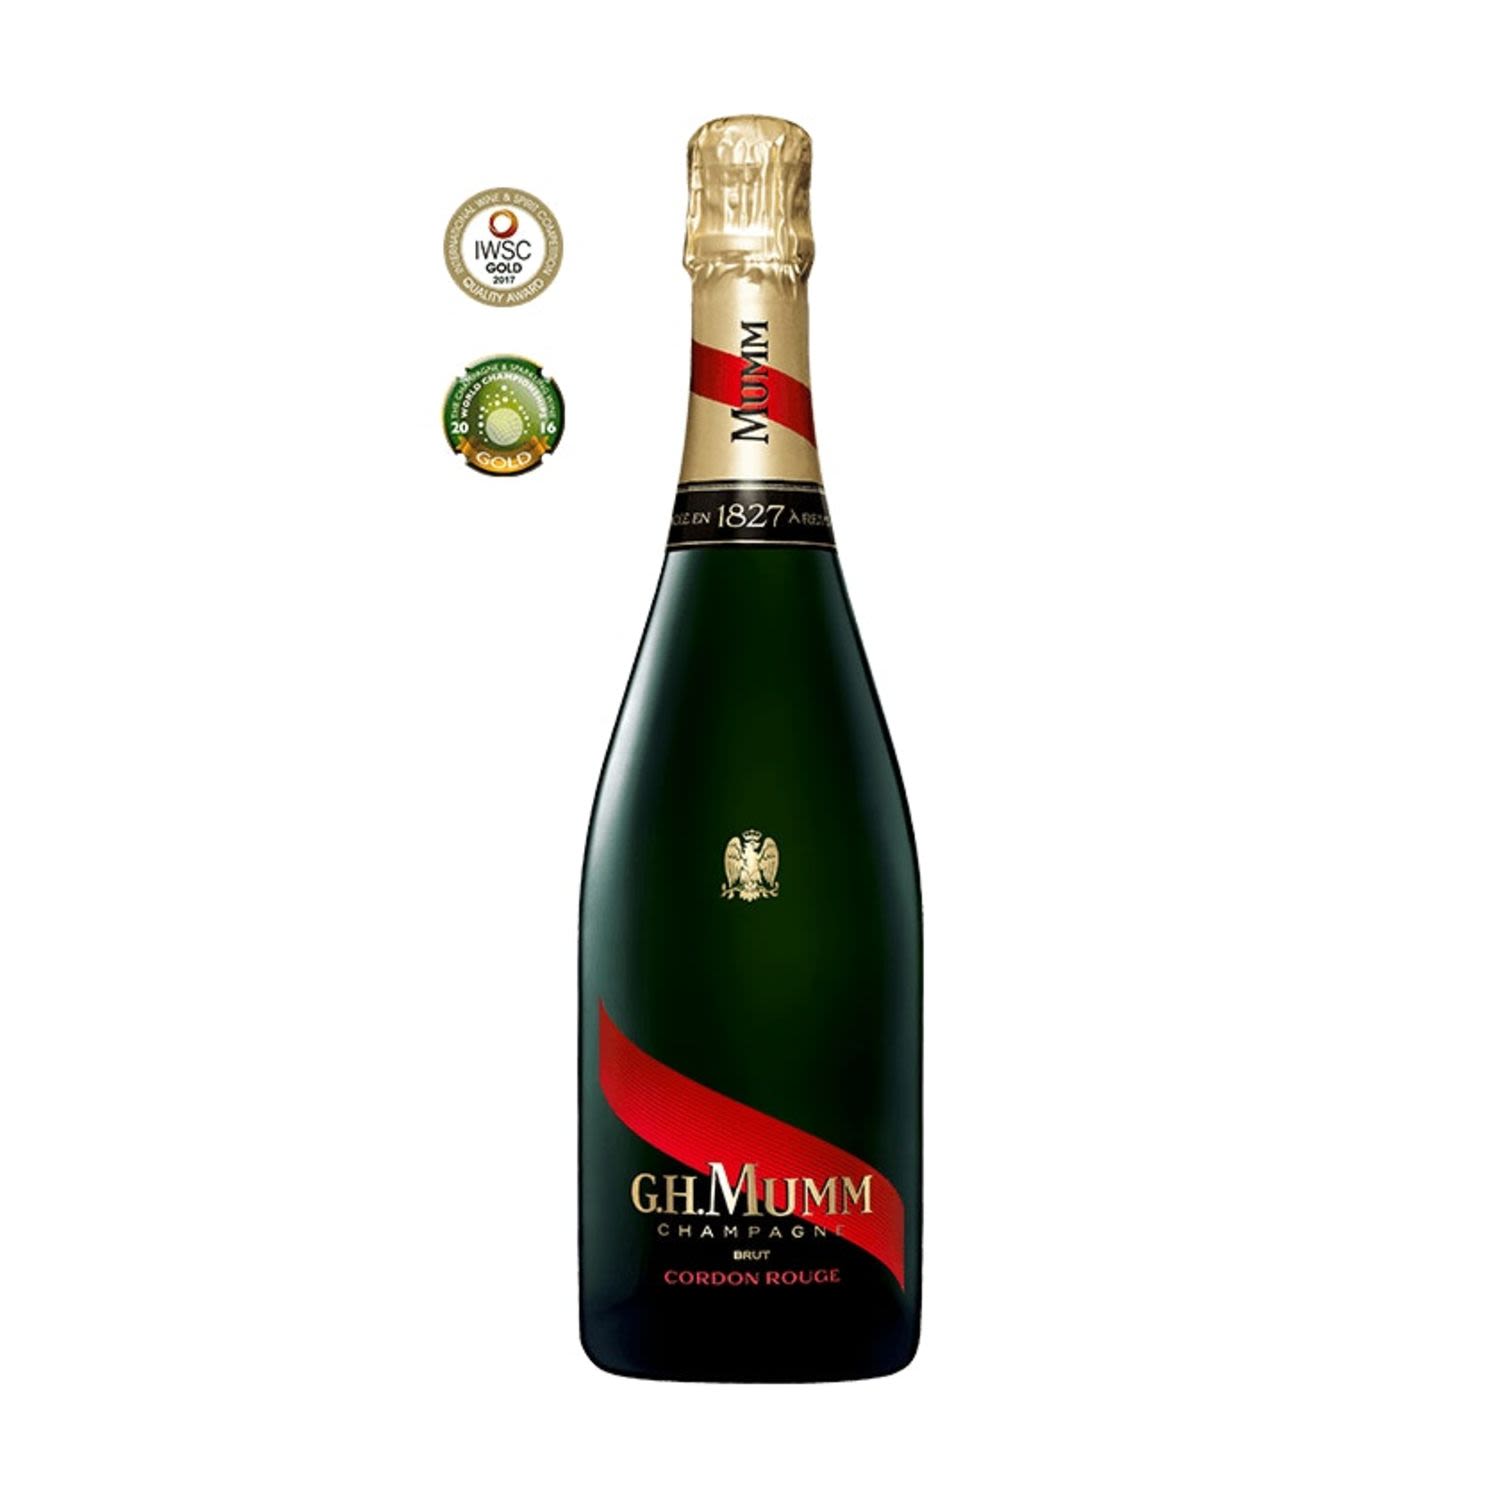 Mumm Cordon Rouge champagne is the heartbeat of Maison Mumm. This cuvée is named after its famous red cordon: the red ribbon of the Legion d’Honneur, France’s highest civilian honour, which has adorned each bottle since 1876.<br /> <br />Alcohol Volume: 12.00%<br /><br />Pack Format: Bottle<br /><br />Standard Drinks: 7.2</br /><br />Pack Type: Bottle<br /><br />Country of Origin: France<br /><br />Region: Champagne<br /><br />Vintage: Non Vintage<br />